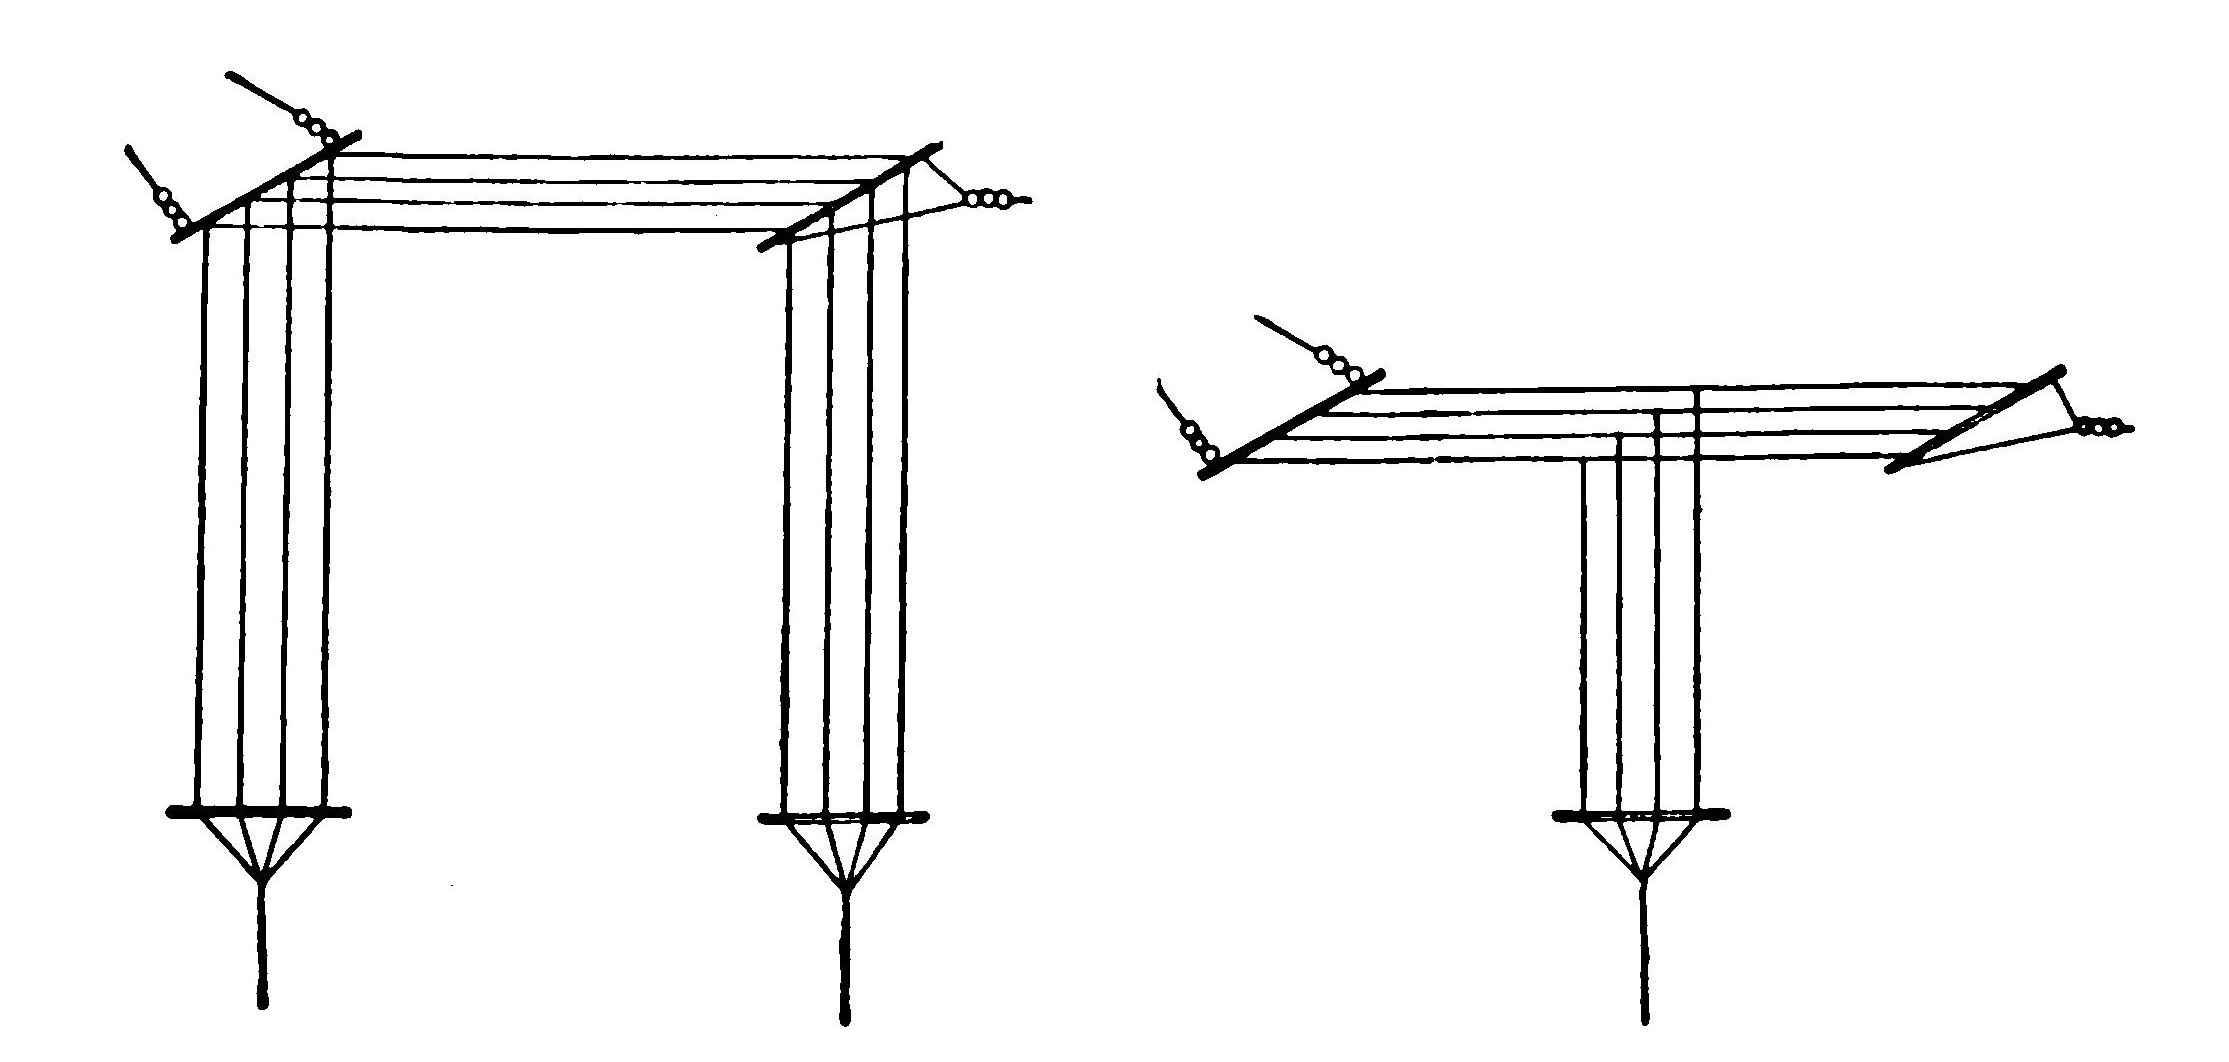 FIG. 20.—Flat top aerials of the inverted "U" and "T" types.